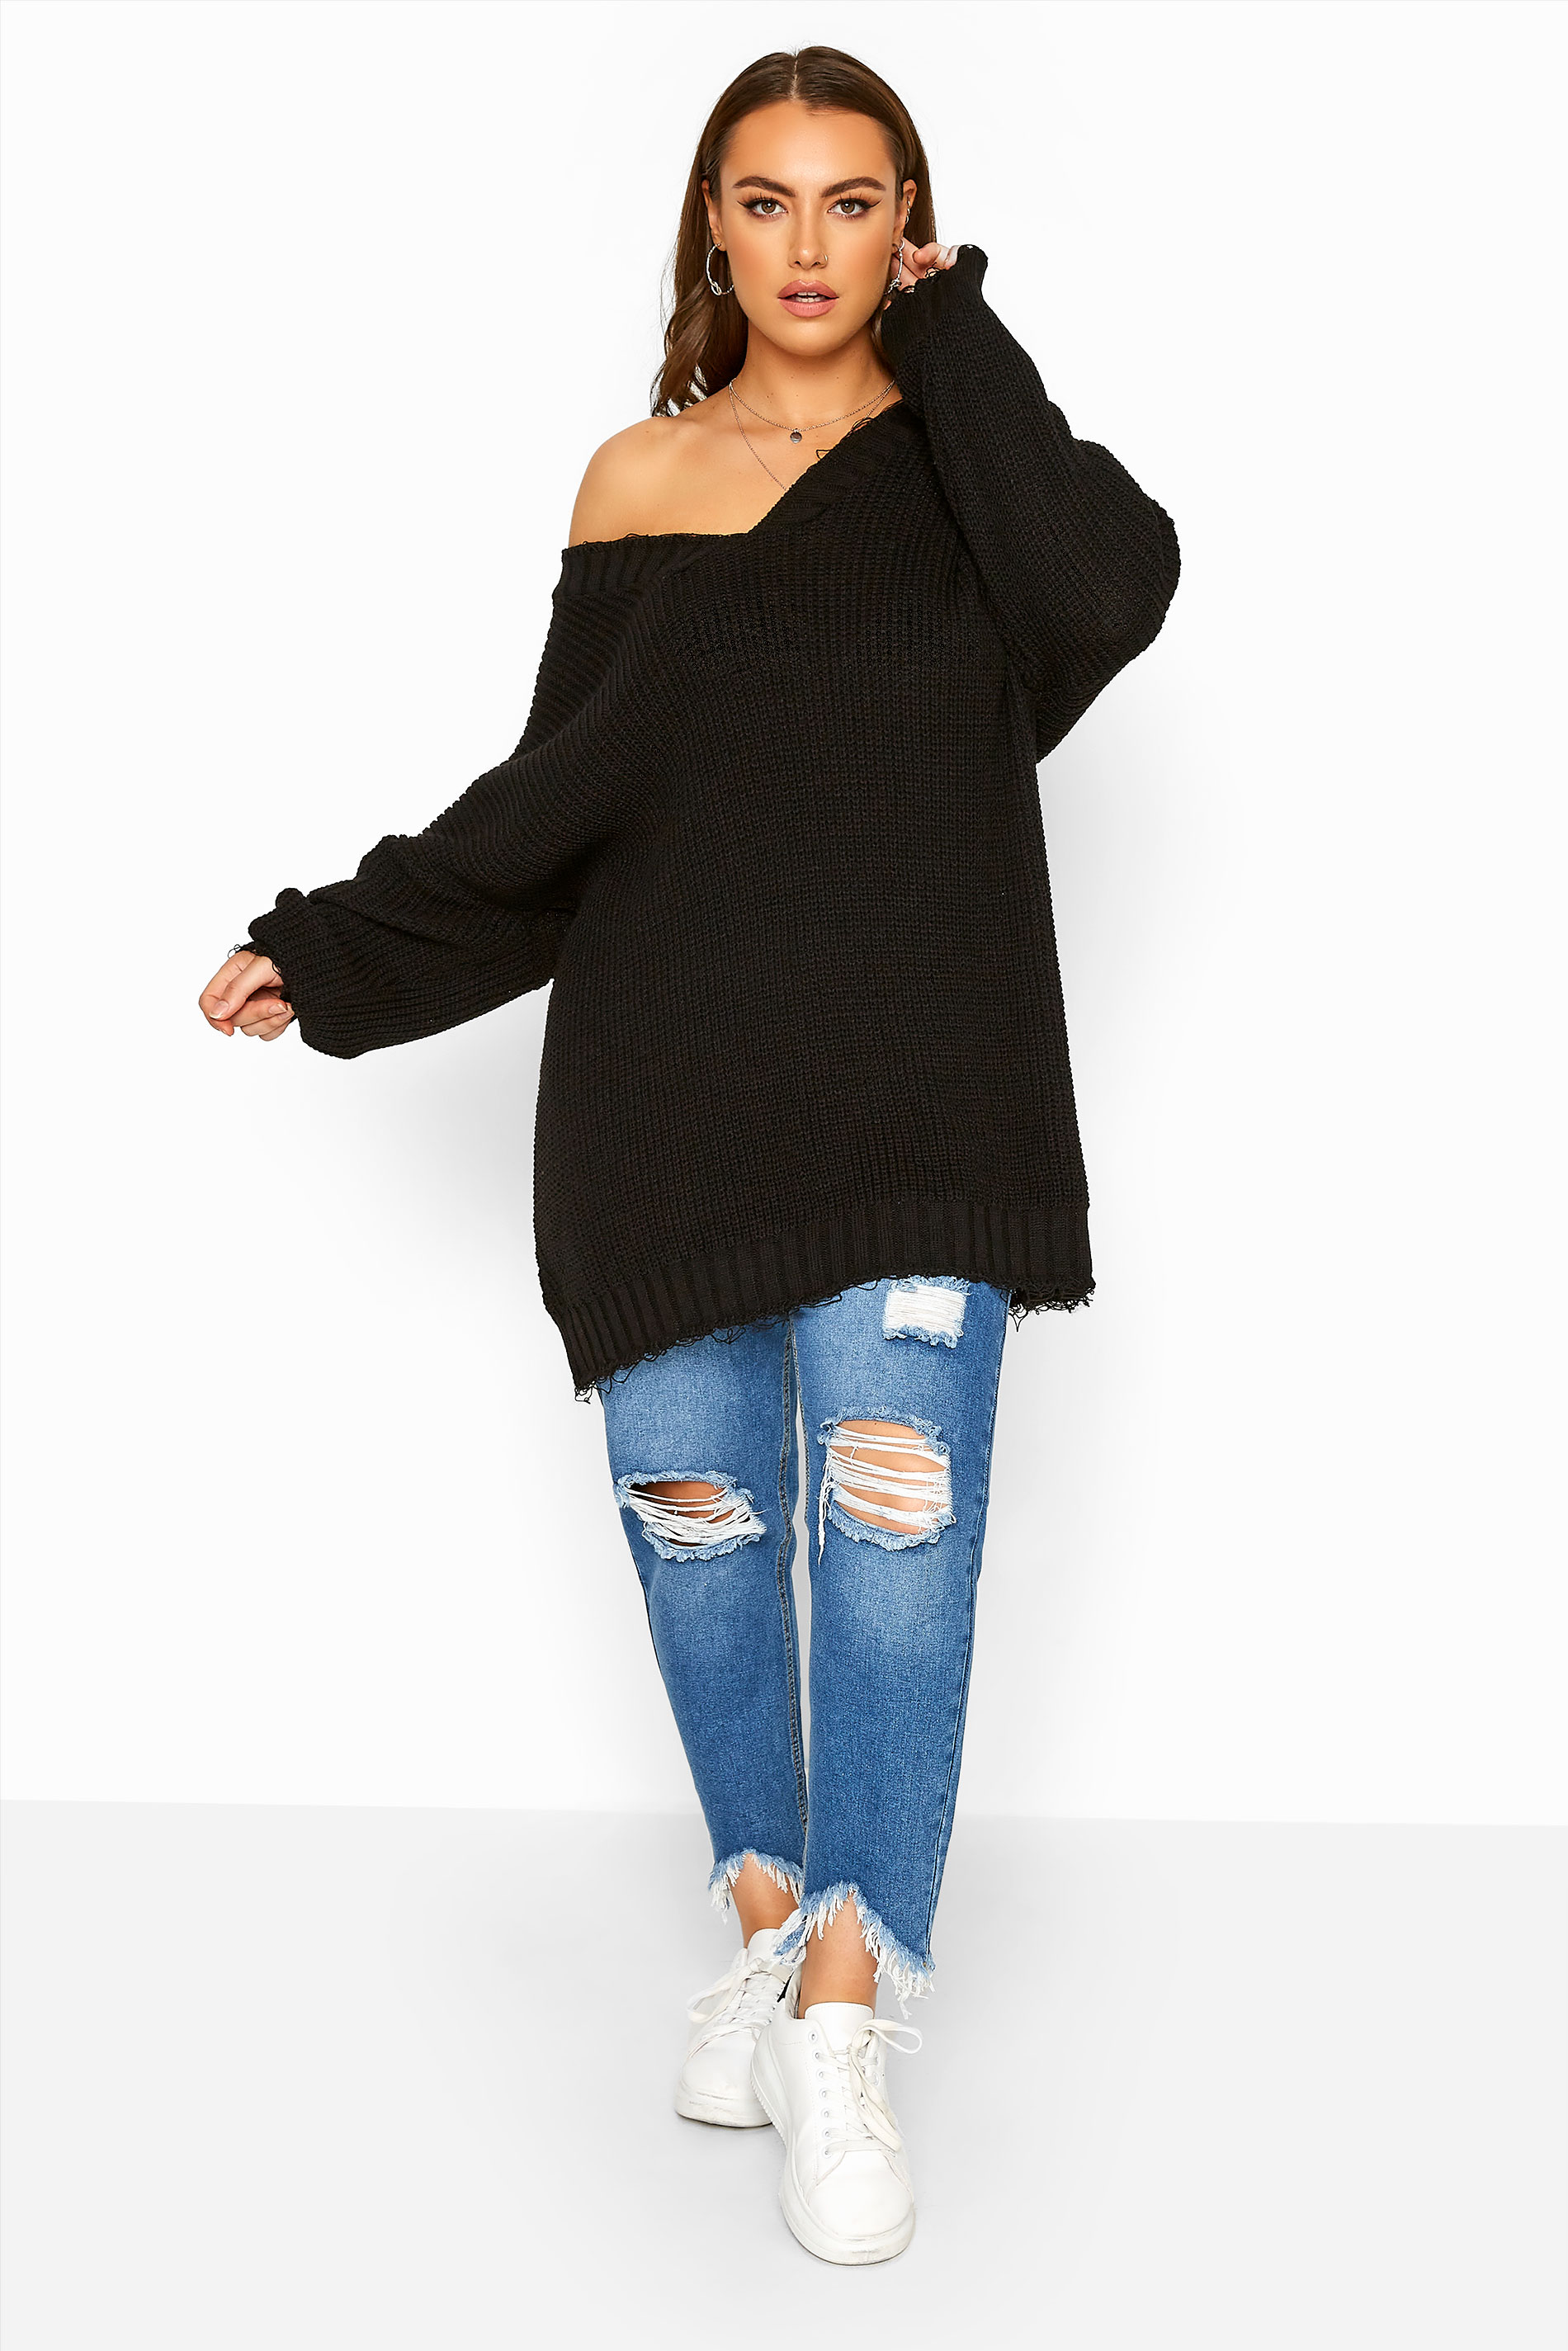 Black Distressed Oversized Knitted Jumper | Yours Clothing